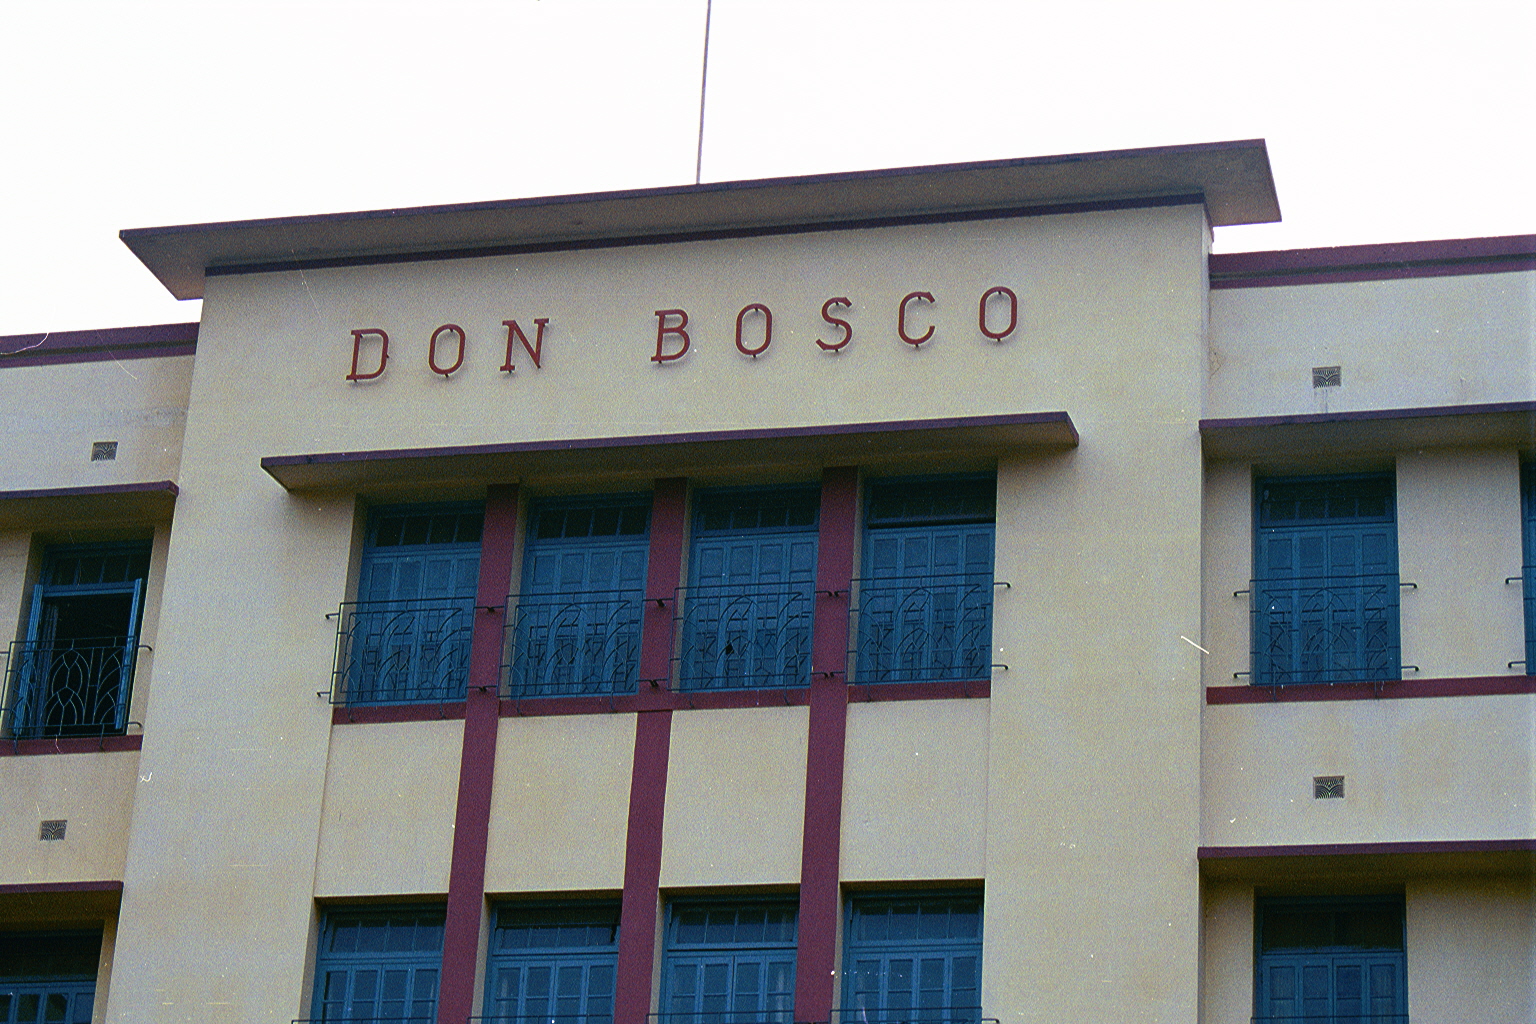 Don Bosco Junior-High School (1932); Calcutta India. The school was founded by Roman-Catholoic missionaries from Italy to honor Saint Francis Bosco. 